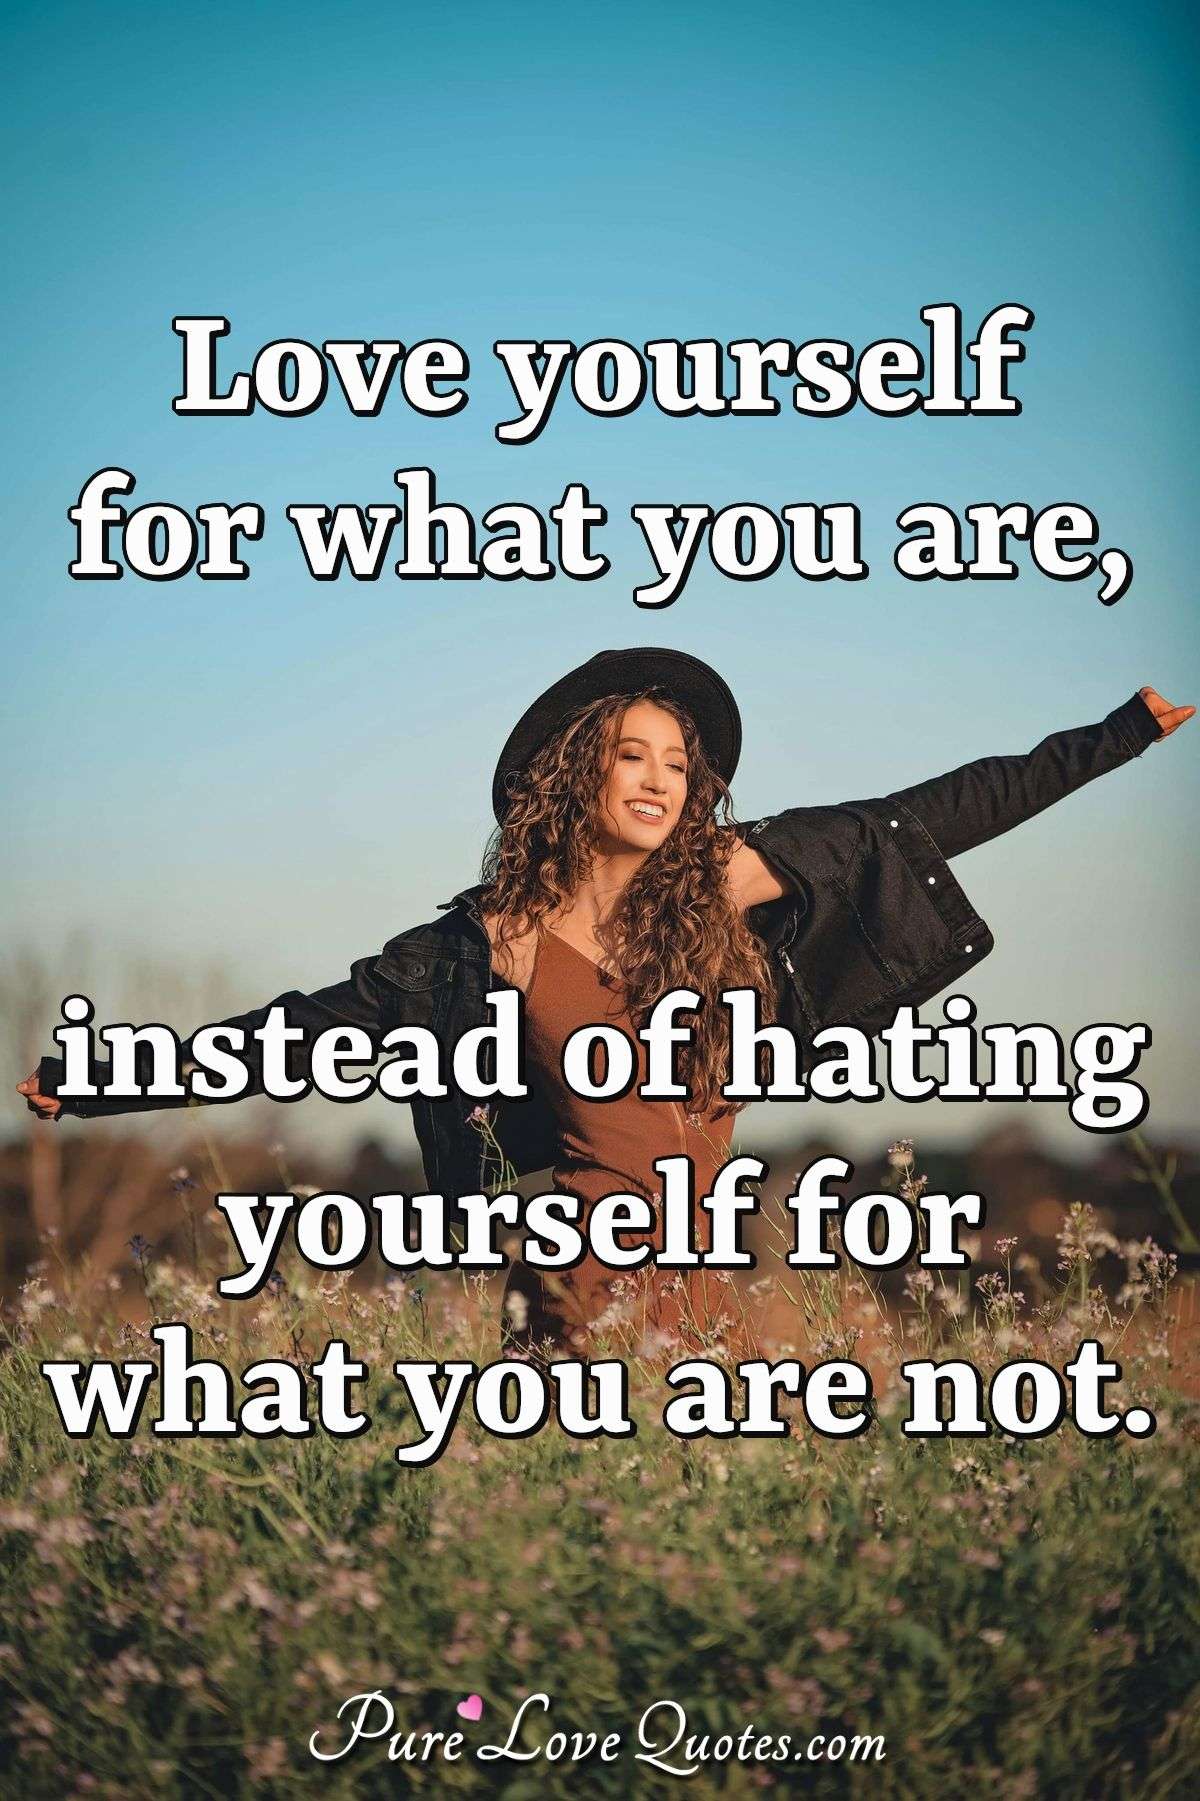 Love Yourself For What You Are Instead Of Hating Yourself For What You Are Not Purelovequotes